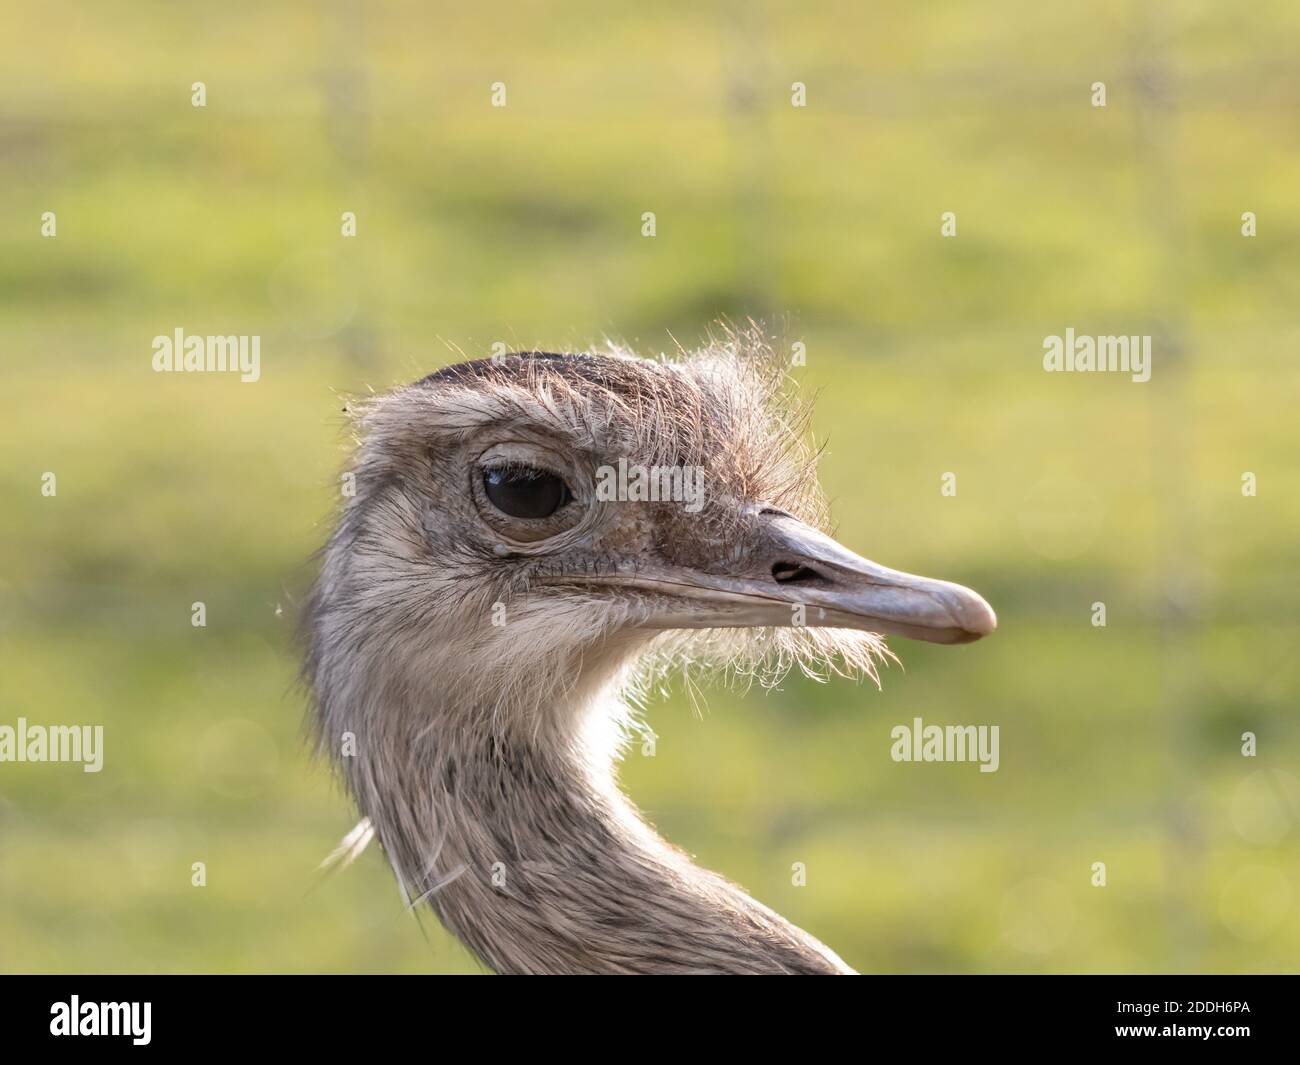 A detailed headshot of an Emu, backlit by low sun. Stock Photo